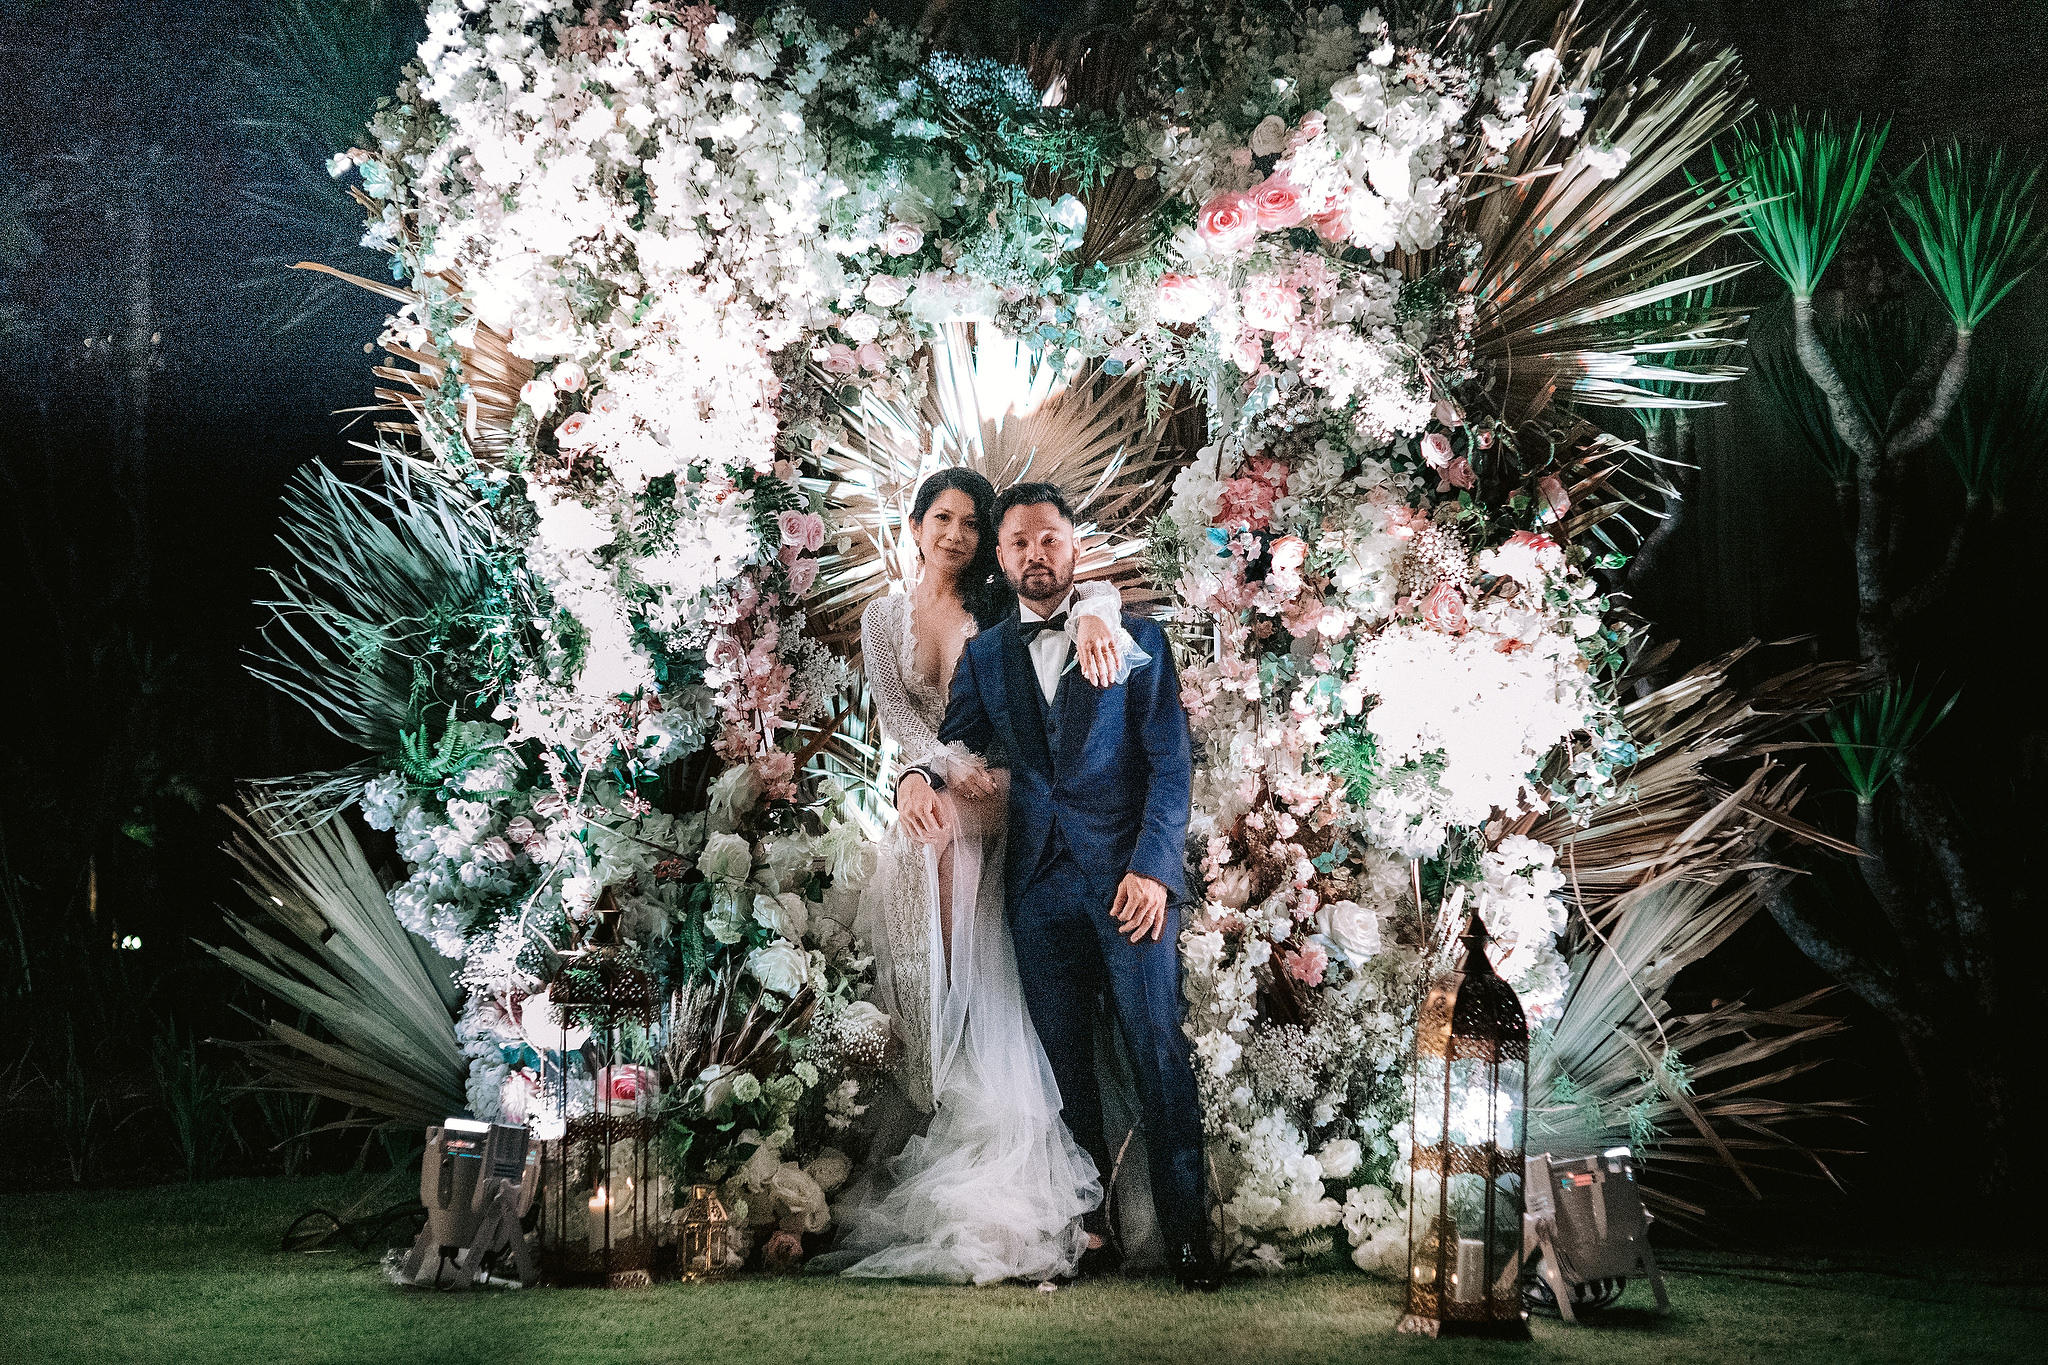 The newlyweds look gorgeous amidst the large floral arrangement at Bali, Indonesia.